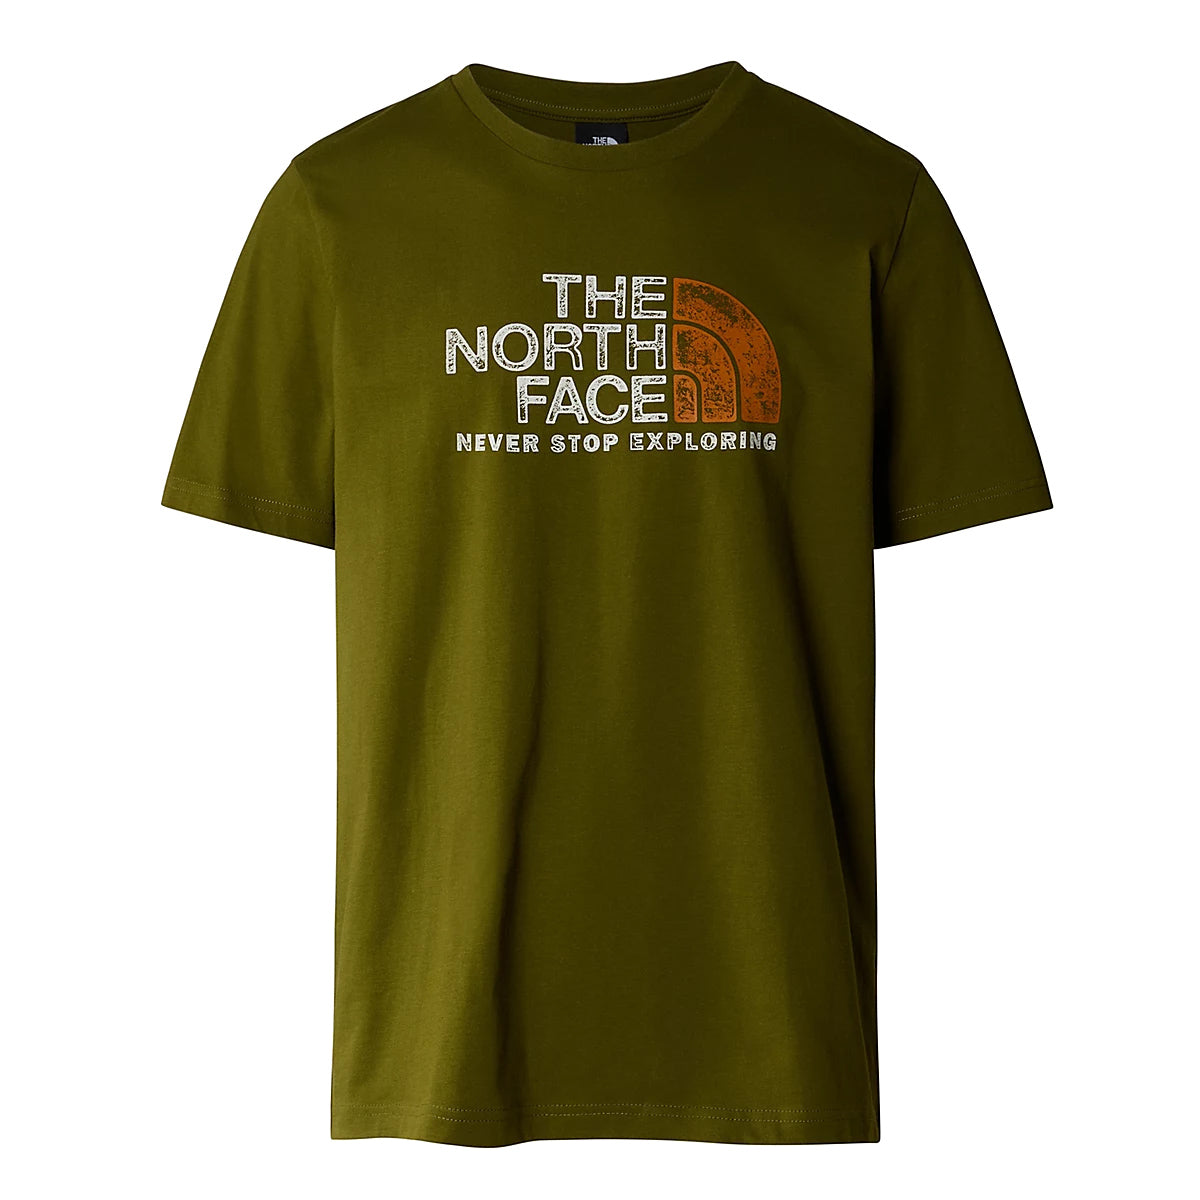 The North Face - T 卹 Rust 2 森林橄欖色 - NF0A87NW - FOREST/OLIVE